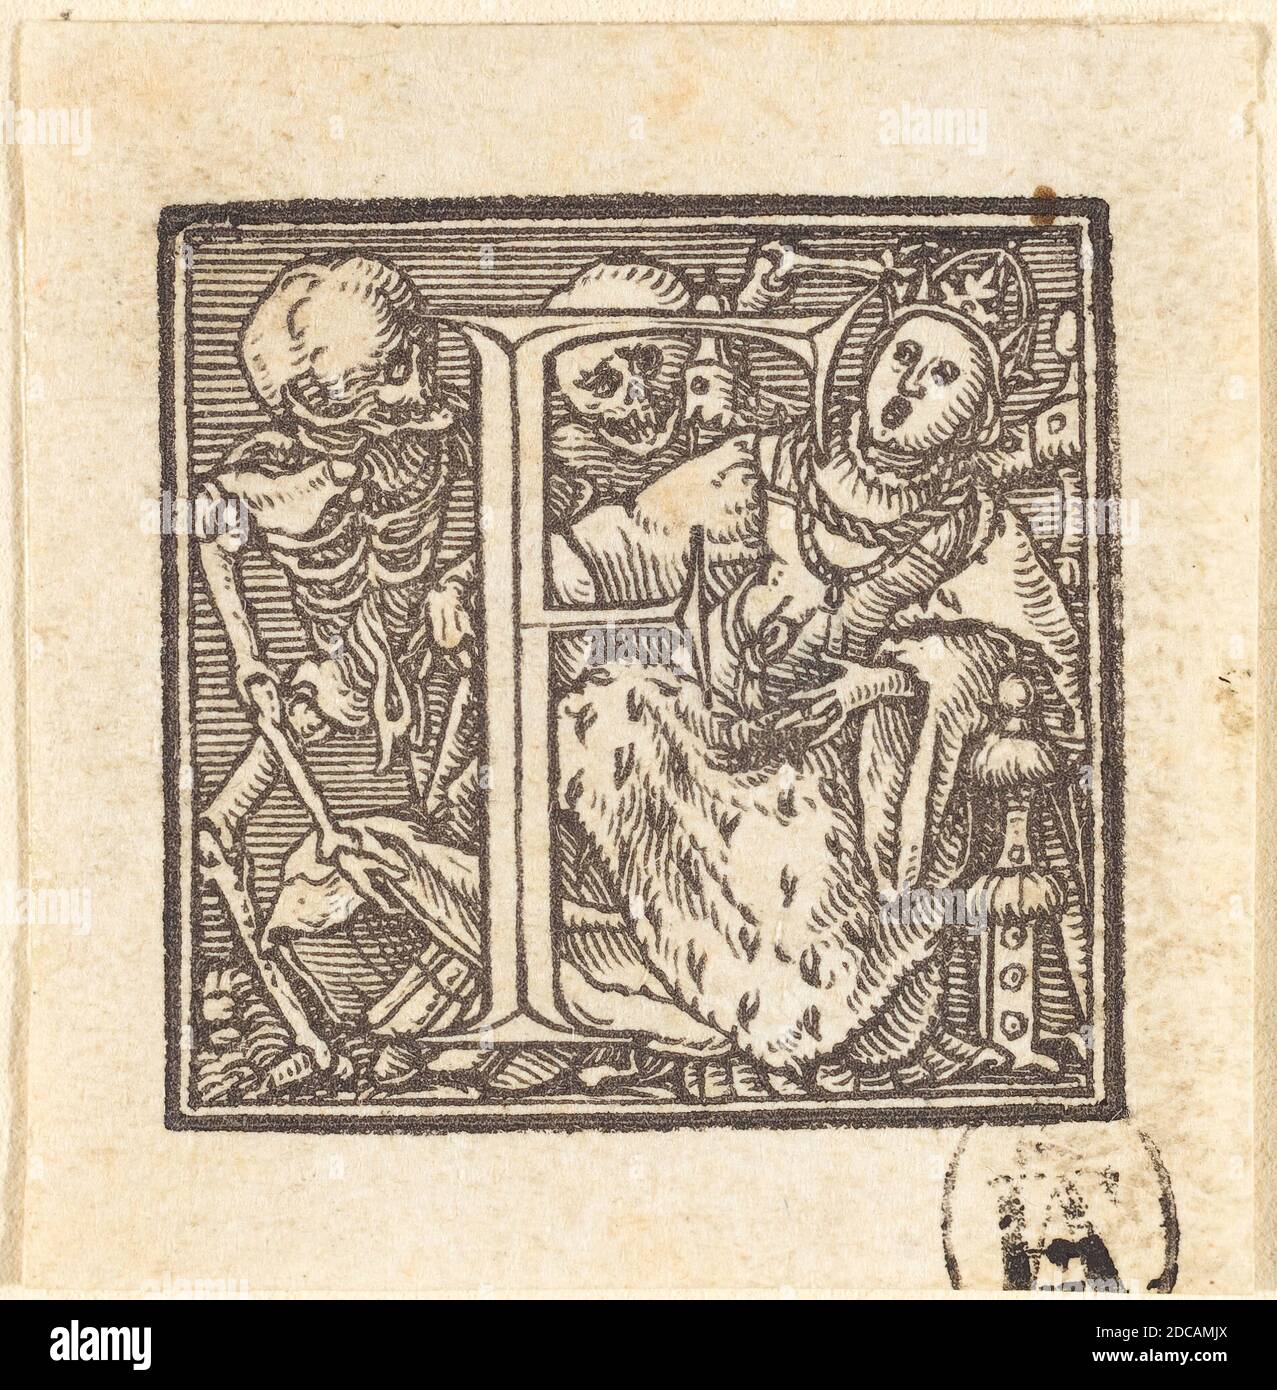 Hans Holbein the Younger, (artist), German, 1497/1498 - 1543, Letter F, Alphabet of Death, (series), woodcut Stock Photo